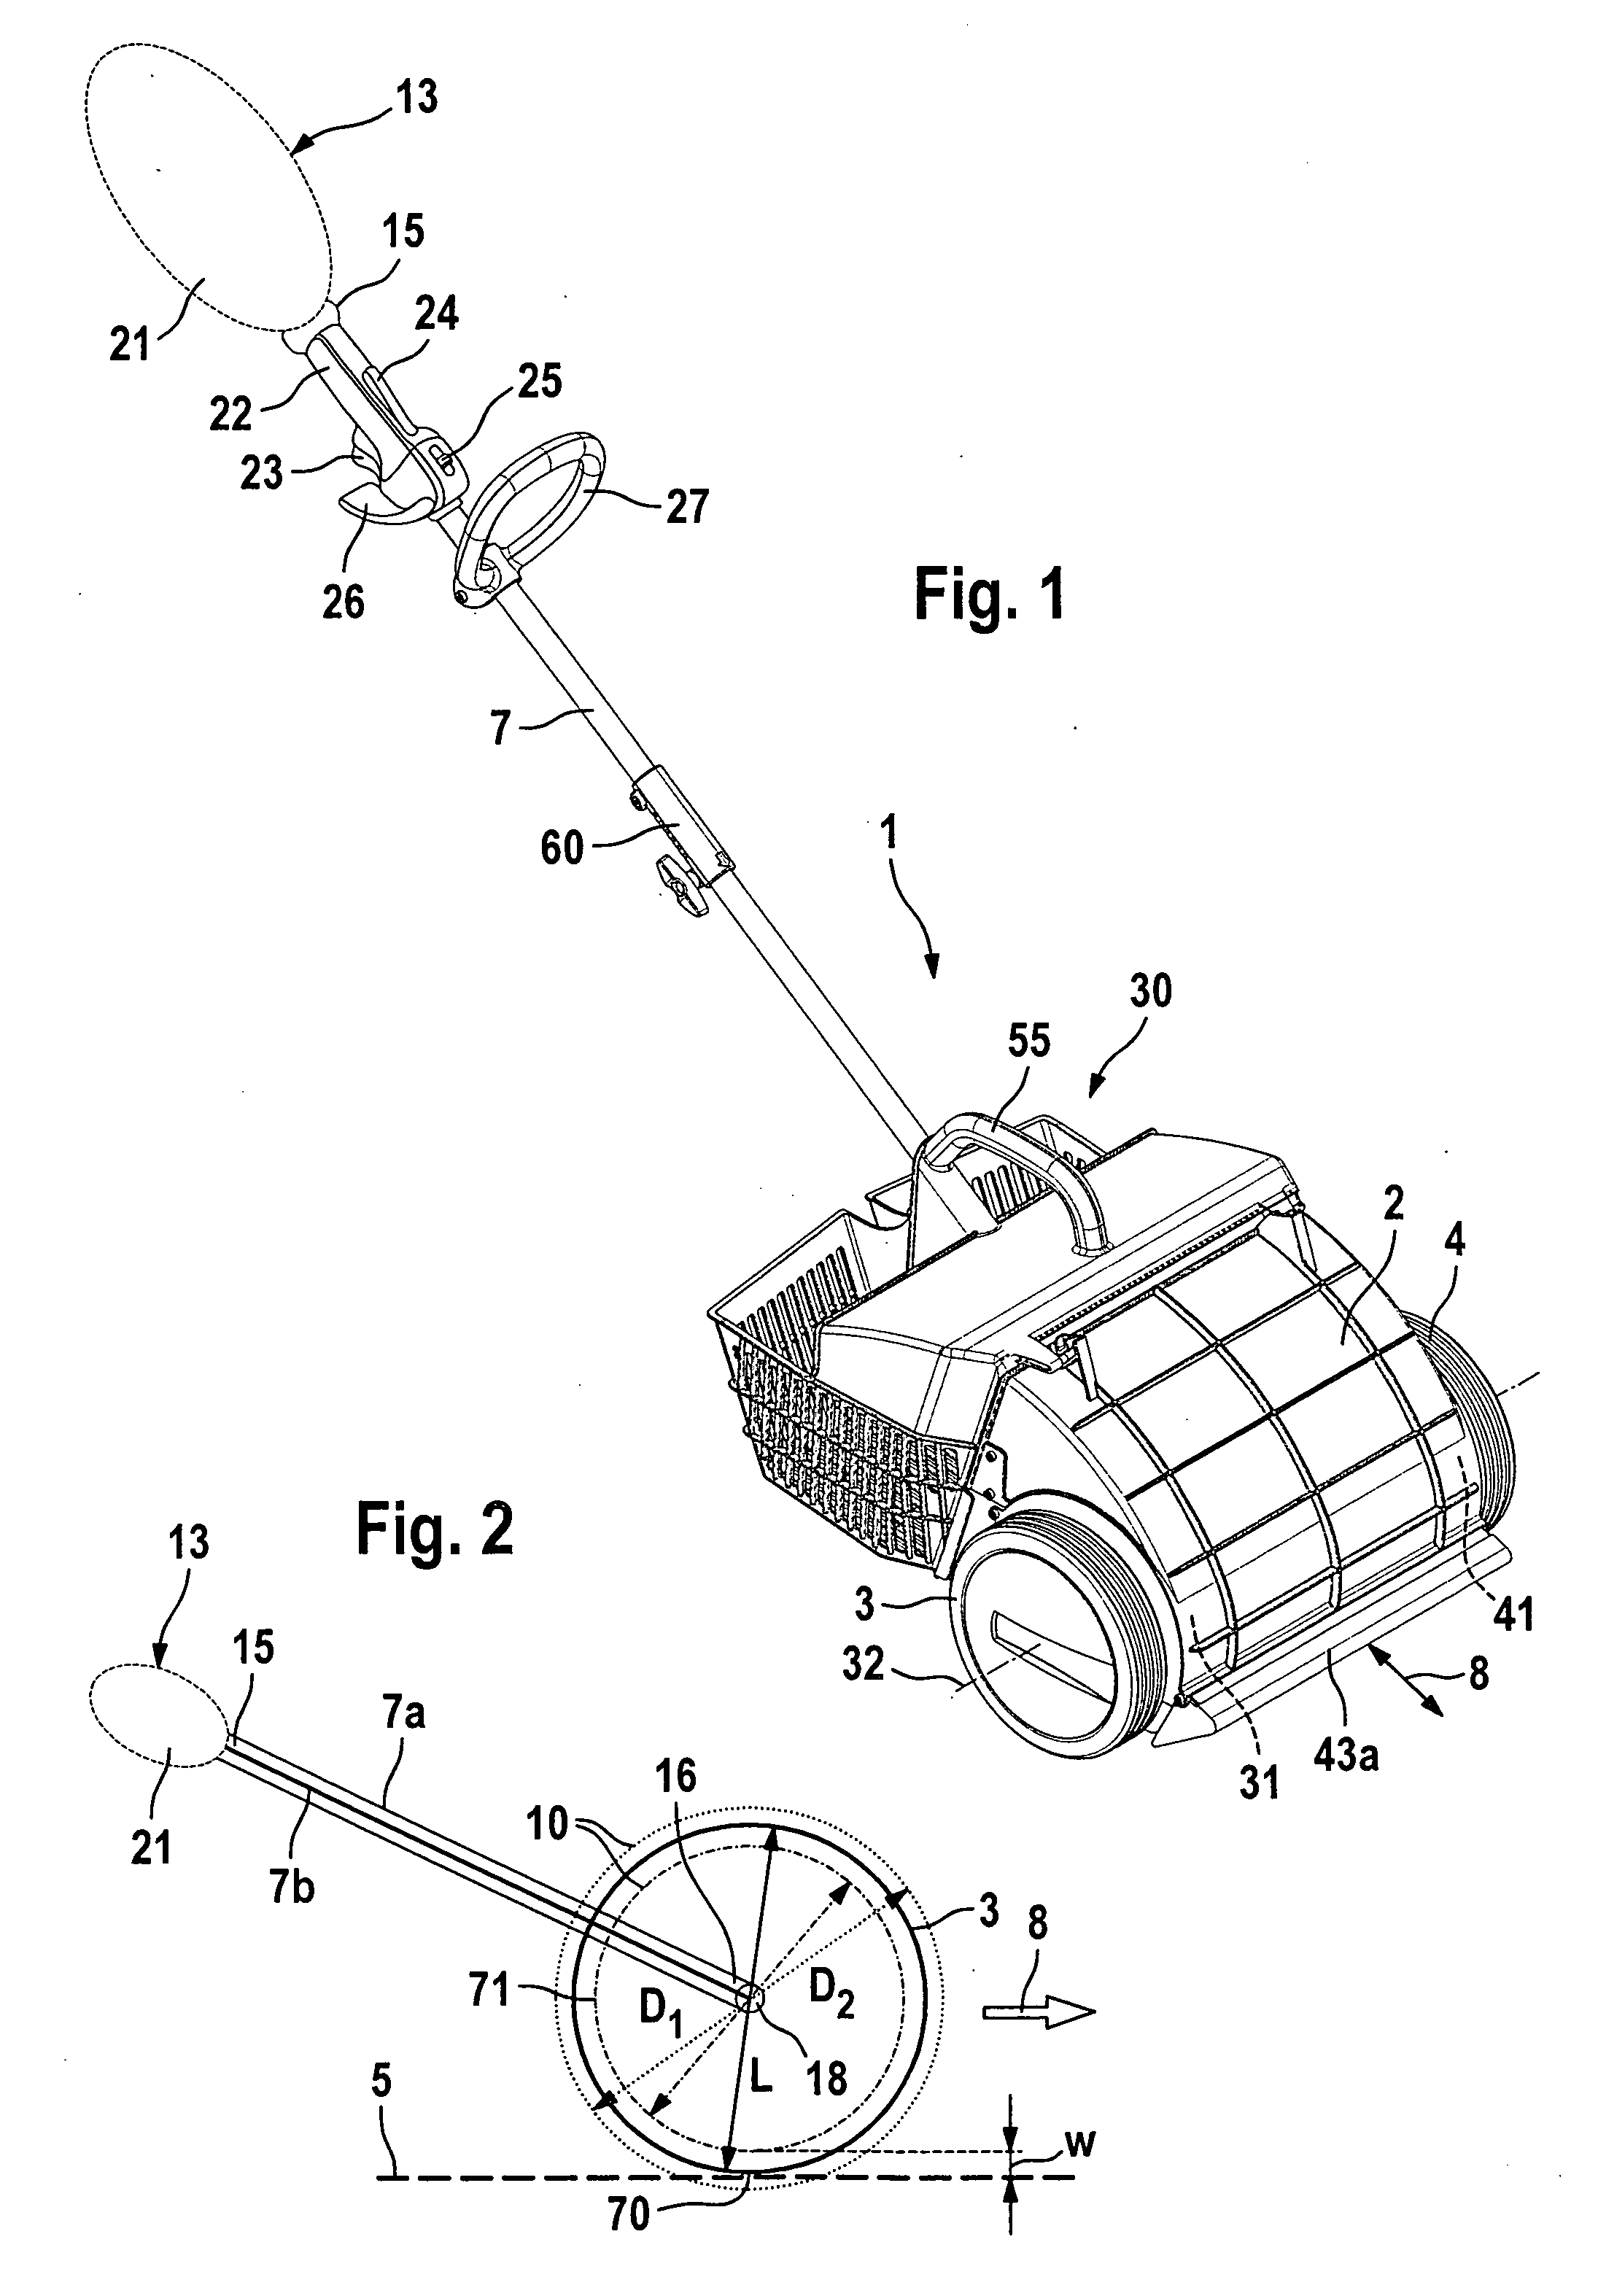 Manually guided apparatus for collecting fruits or nuts